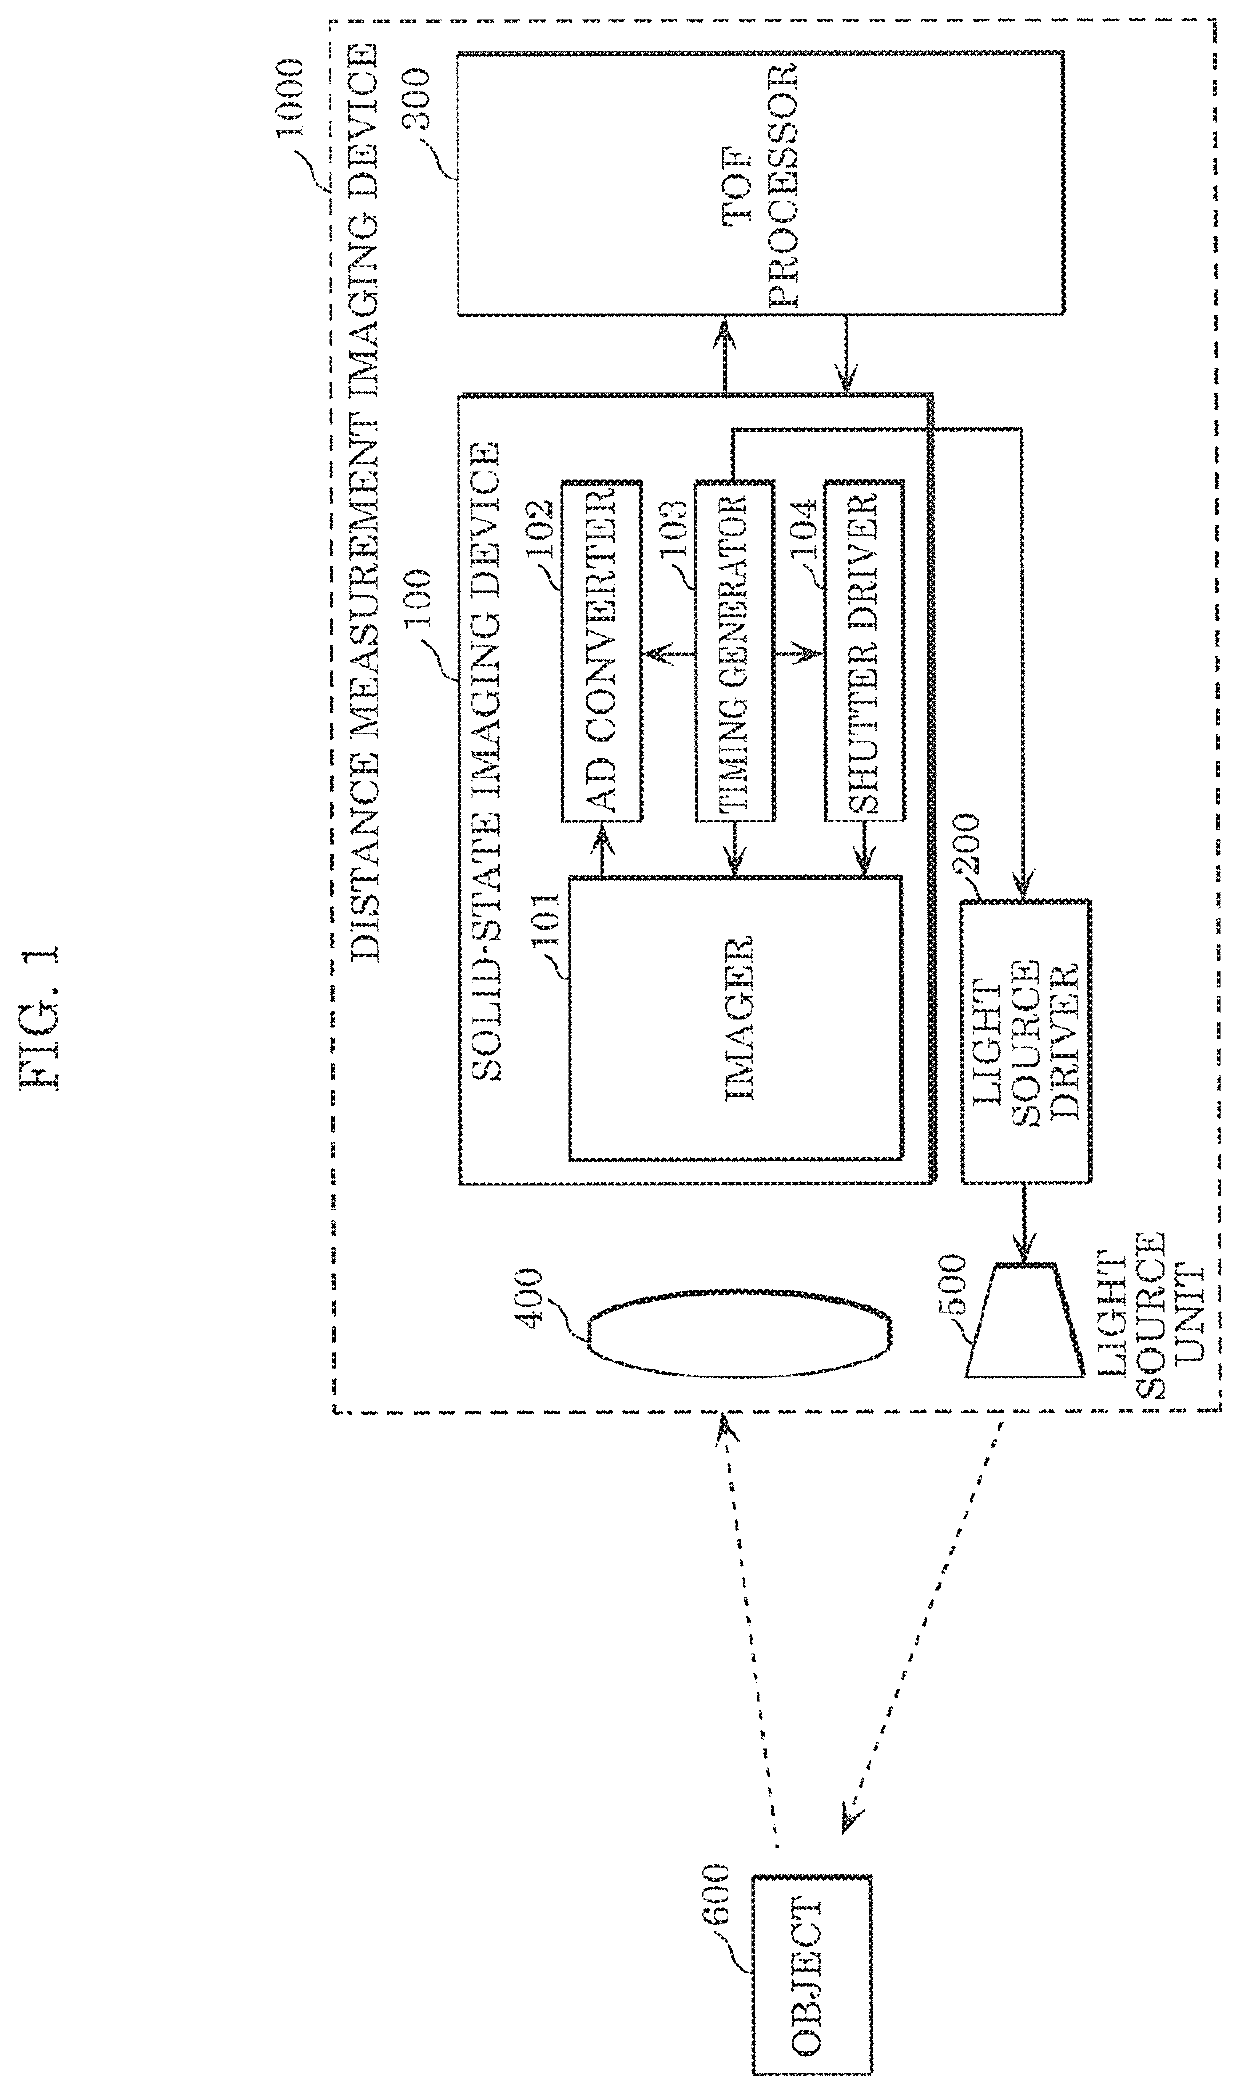 Solid-state imaging device having increased distance measurement accuracy and increased distance measurement range